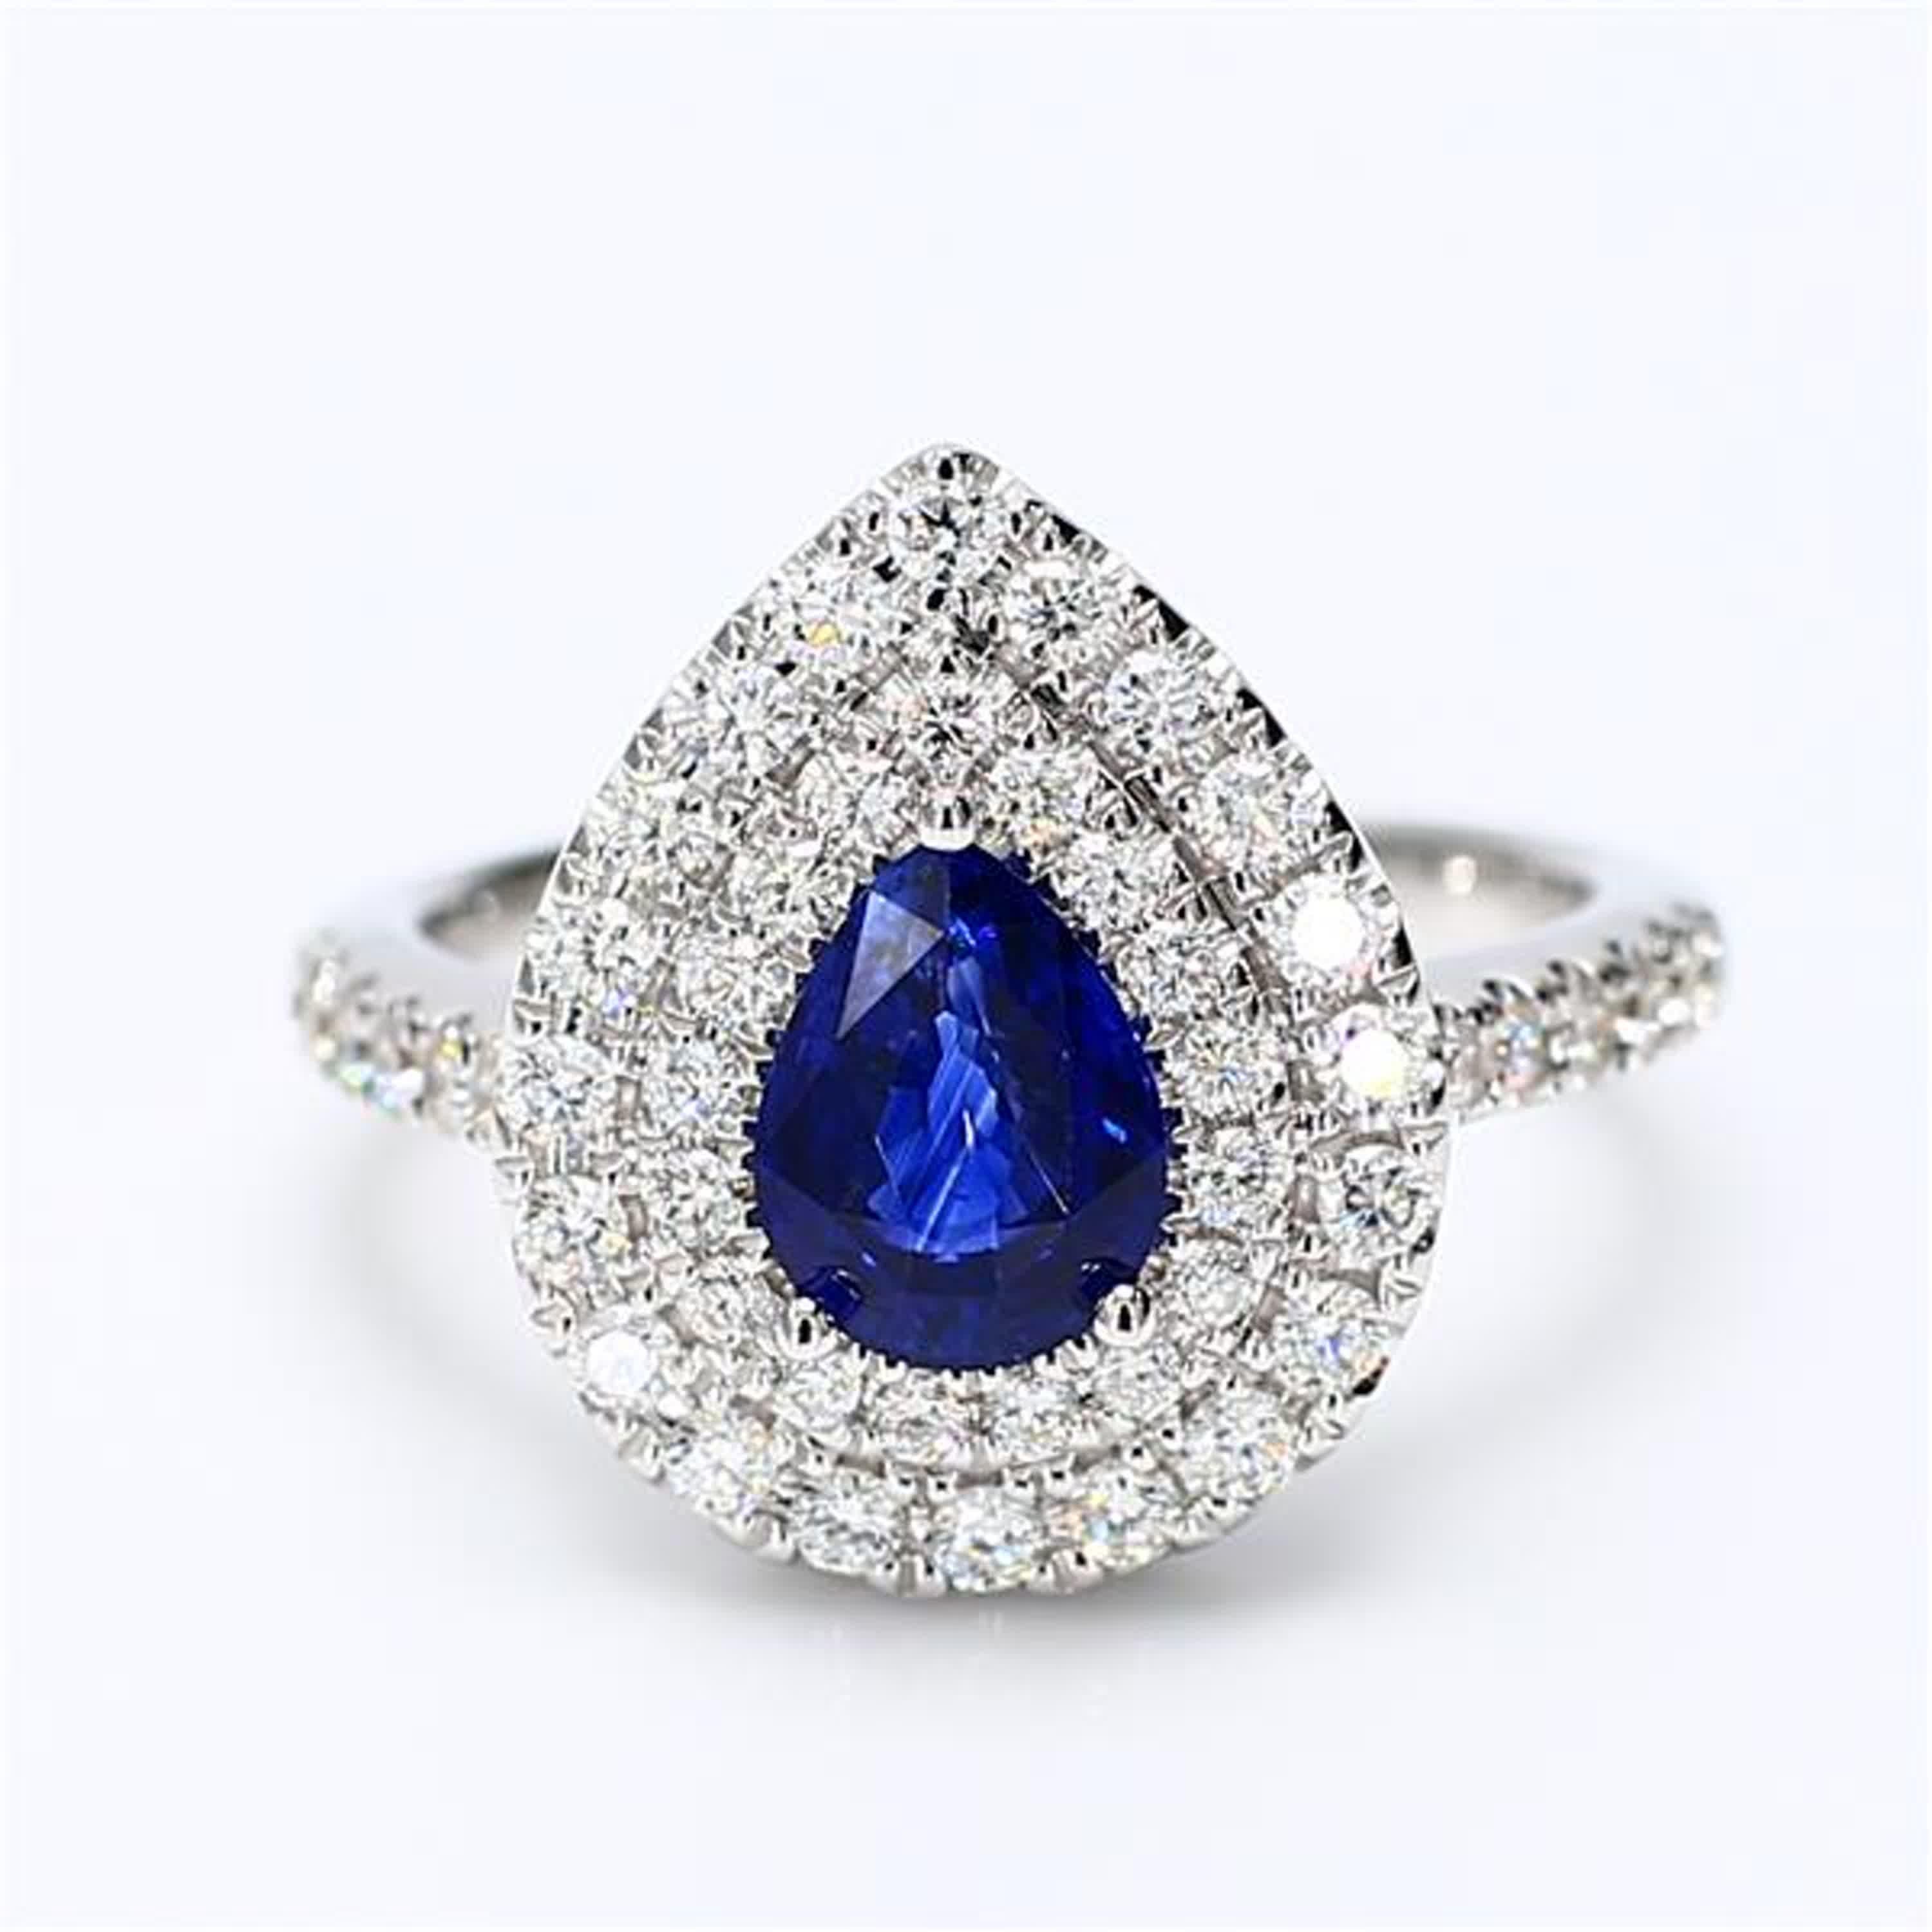 RareGemWorld's classic sapphire ring. Mounted in a beautiful 18K White Gold setting with a natural pear cut blue sapphire. The sapphire is surrounded by natural round white diamond melee. This ring is guaranteed to impress and enhance your personal